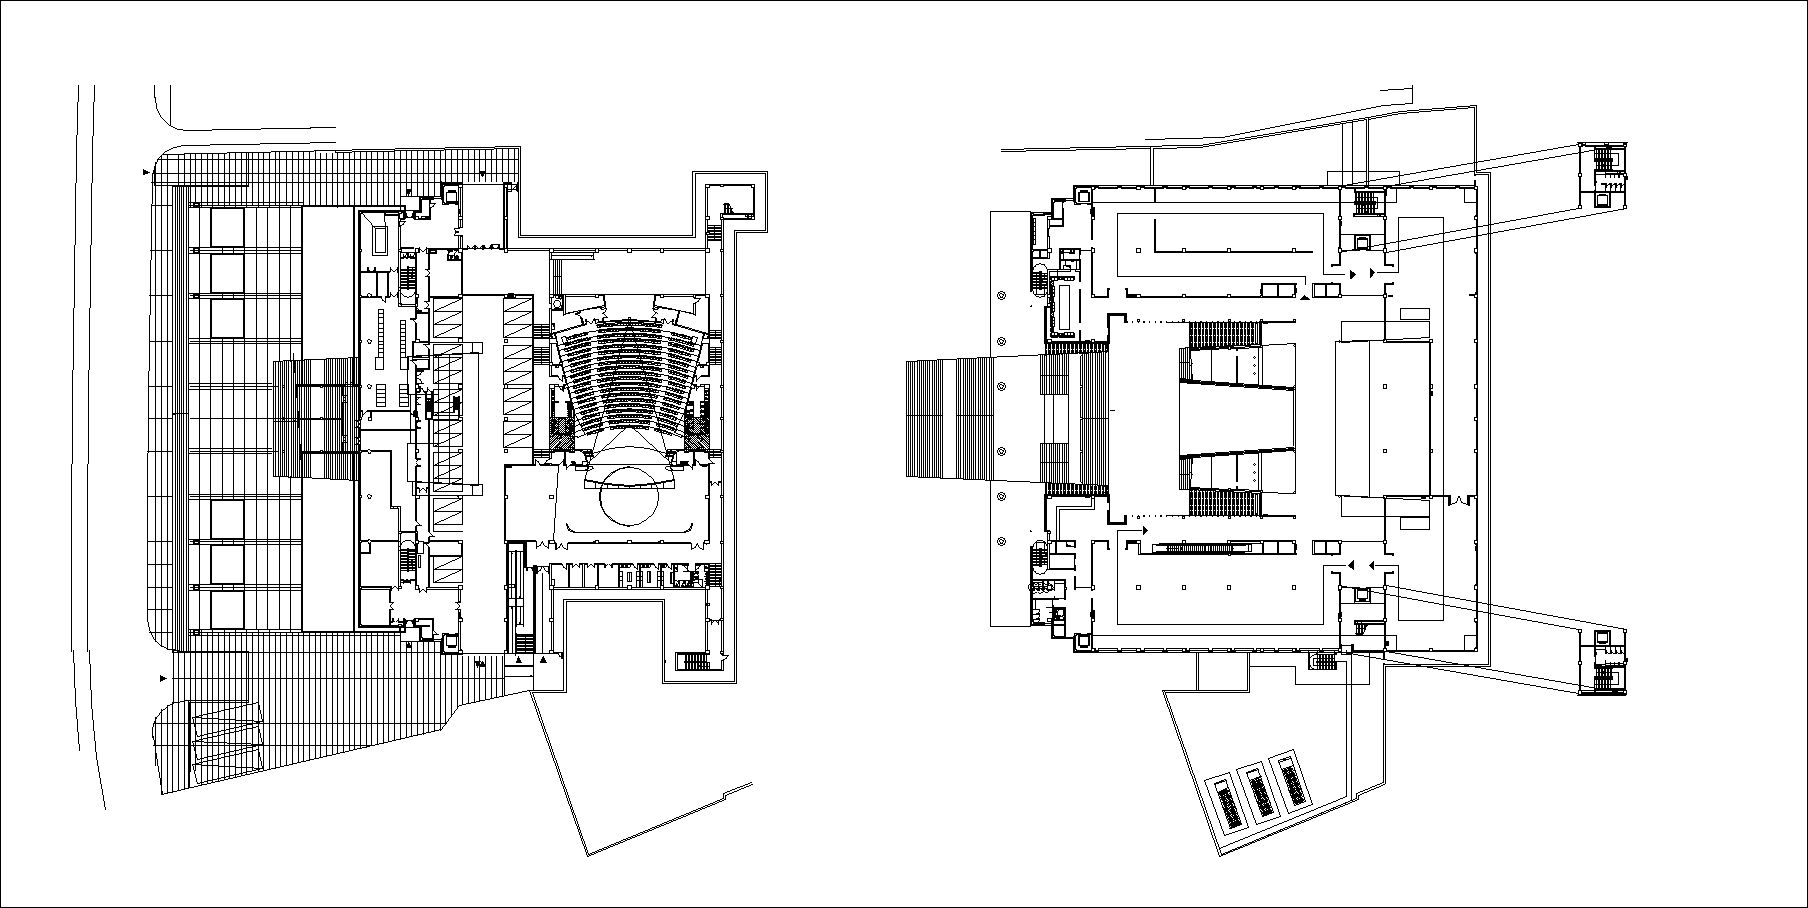  Museum Floor Plans and Drawings-Elevations, Design  concept, and Details